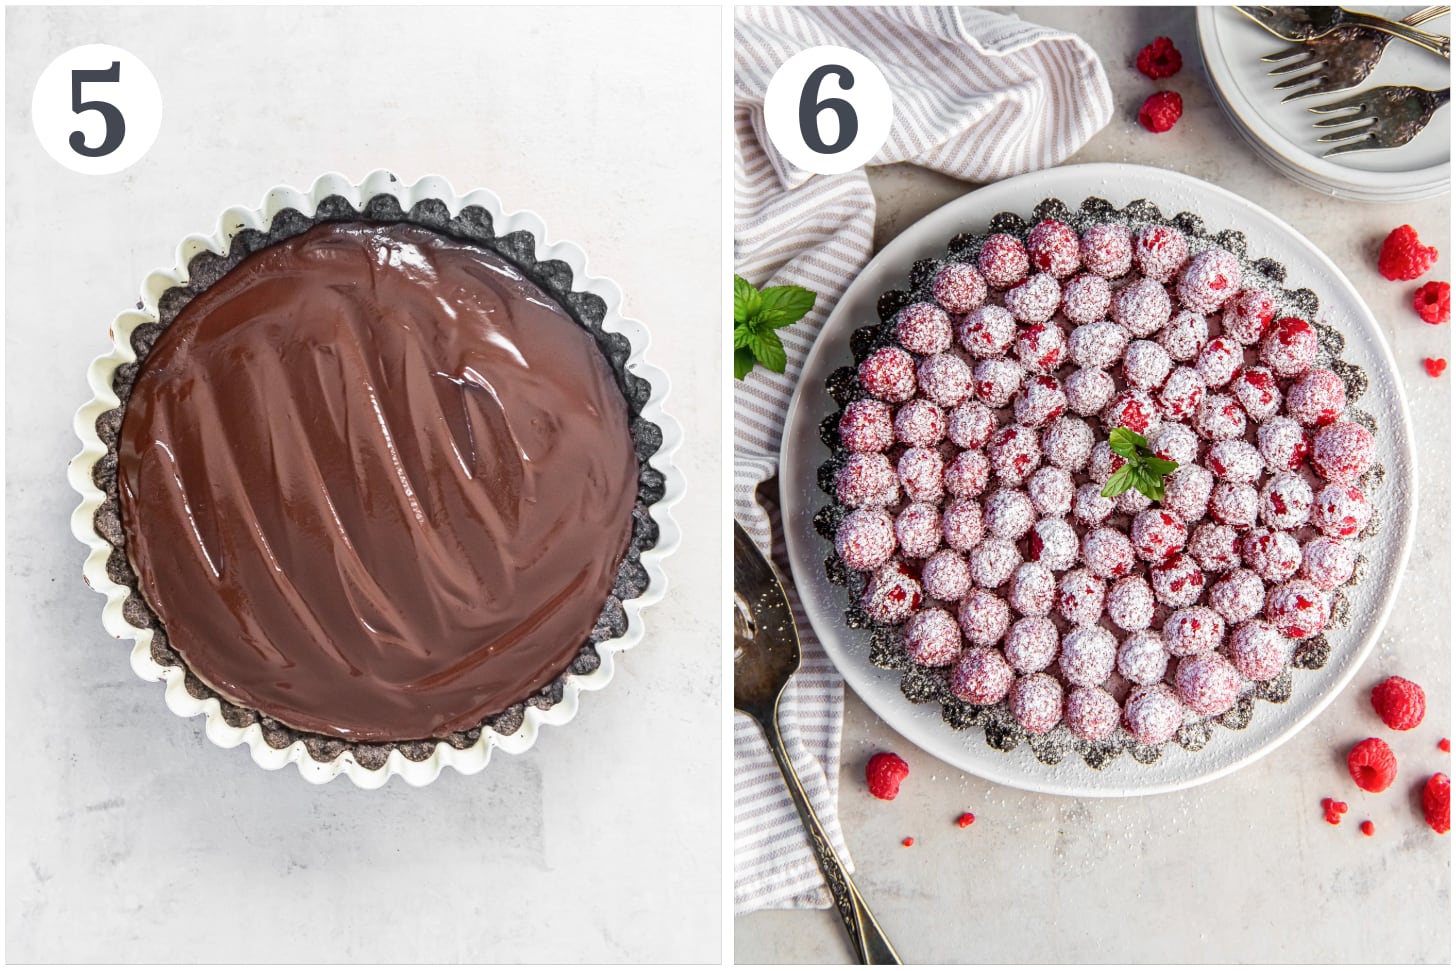 photo collage demonstrating how to fill a tart with chocolate ganache and layer with raspberries.